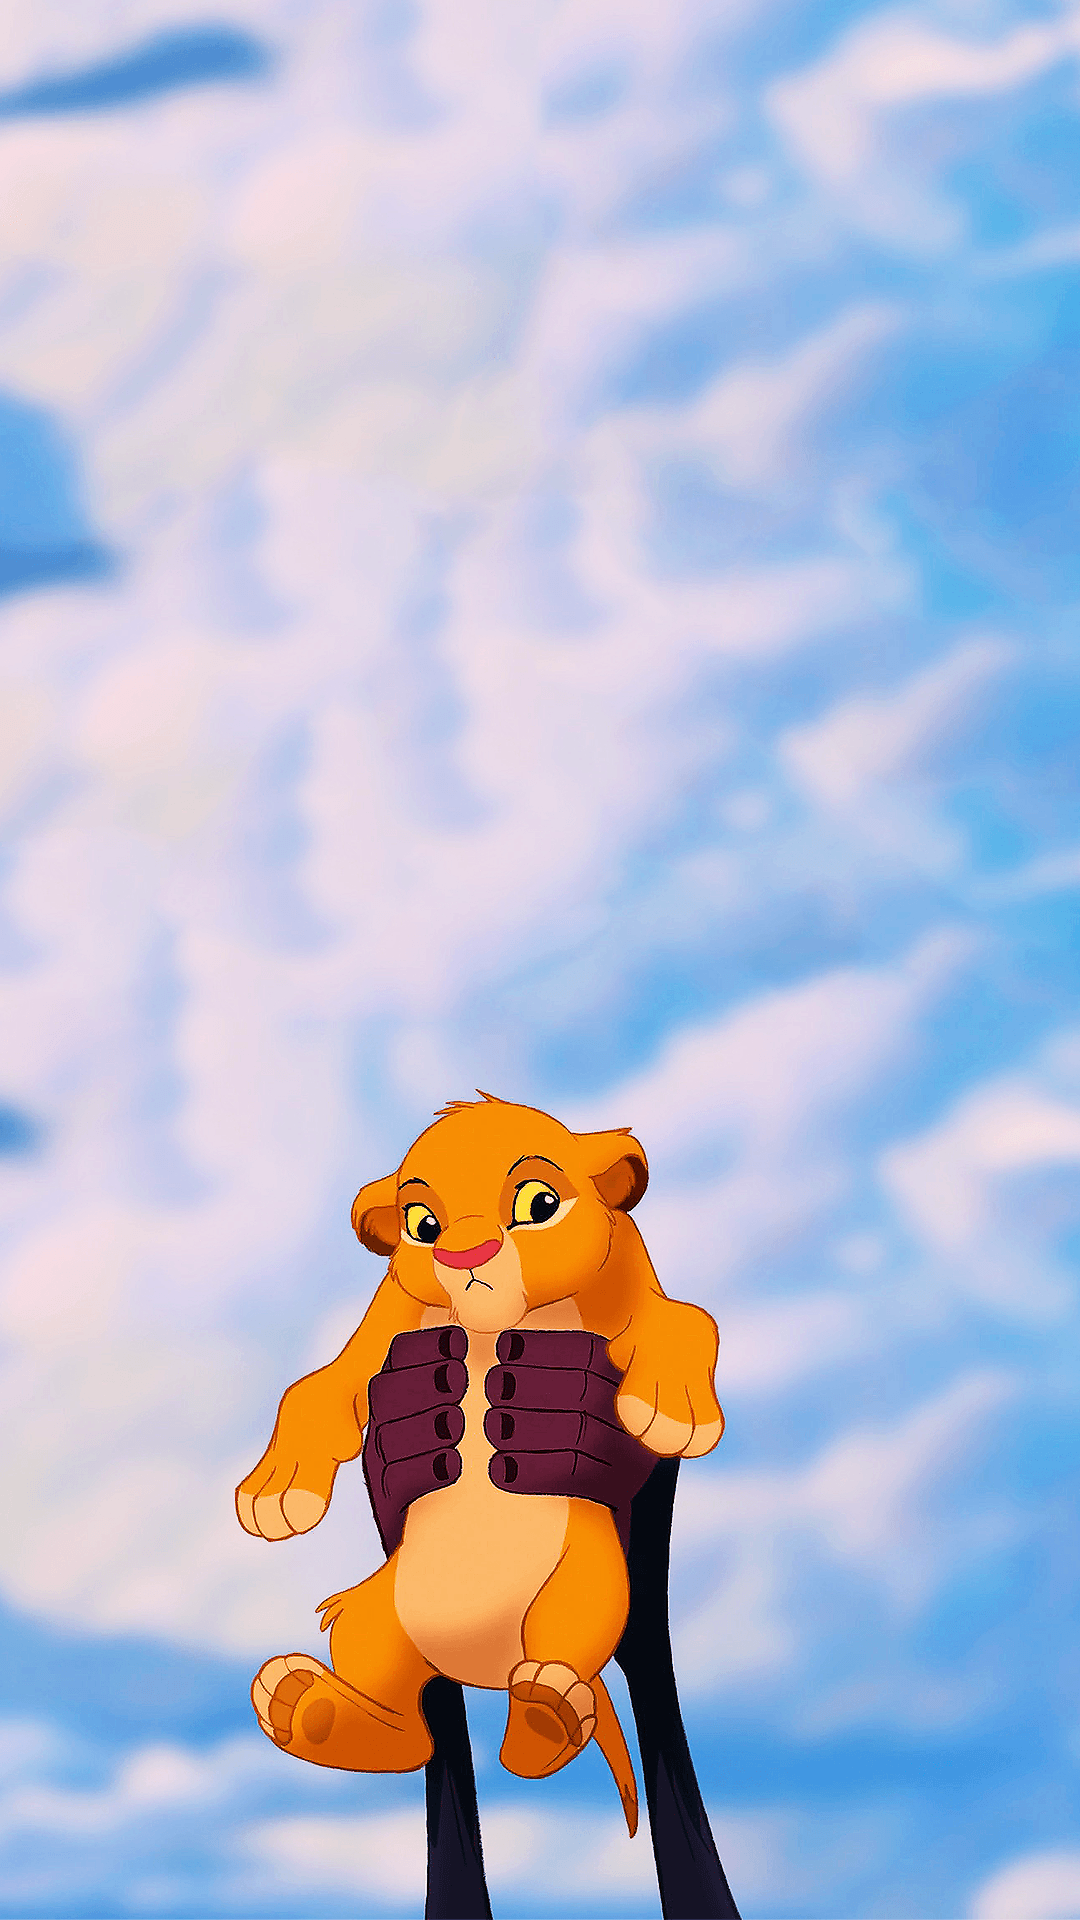 The Lion King background can find the rest on my website